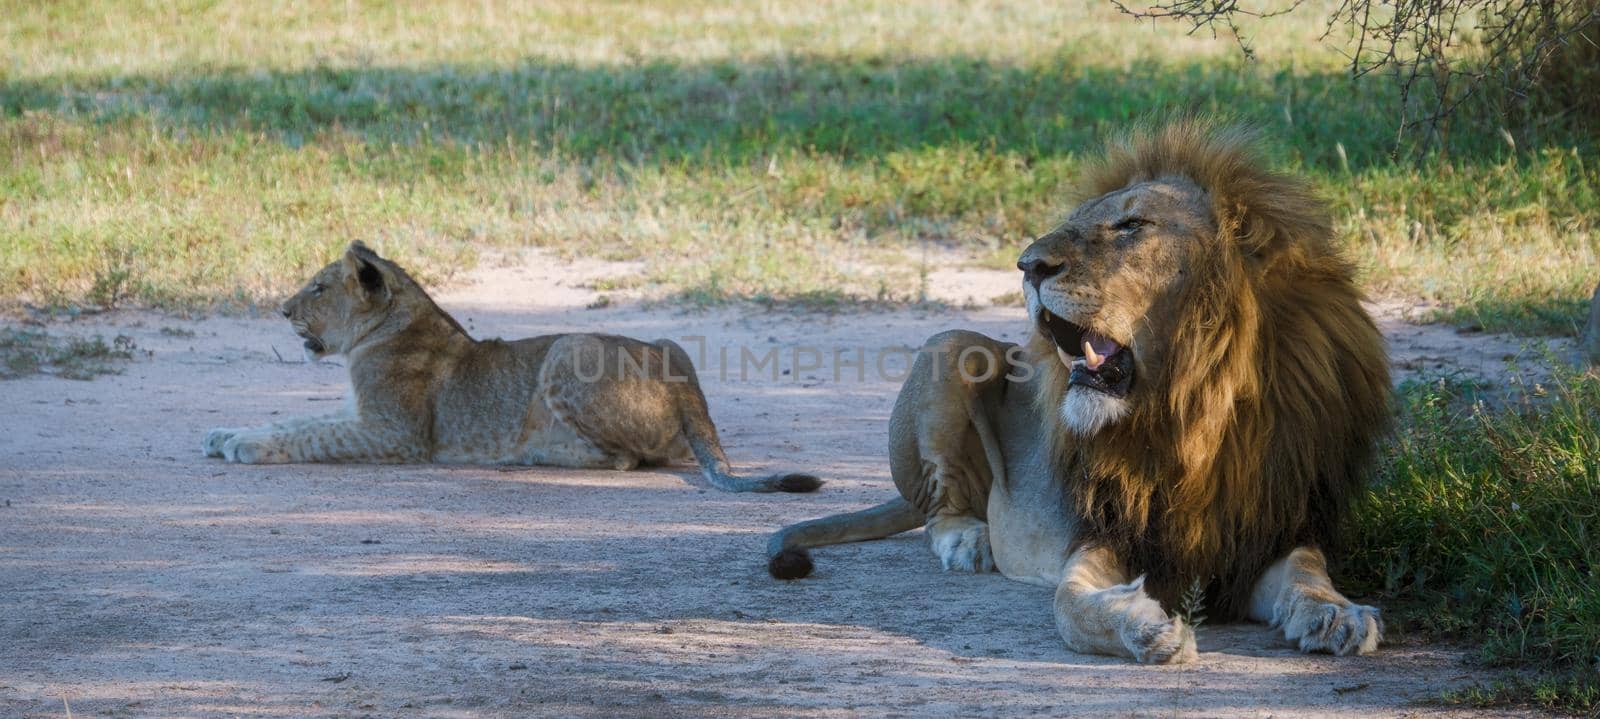 African Lions during safari game drive in Kruger National park South Africa. close up of Lions looking into camera